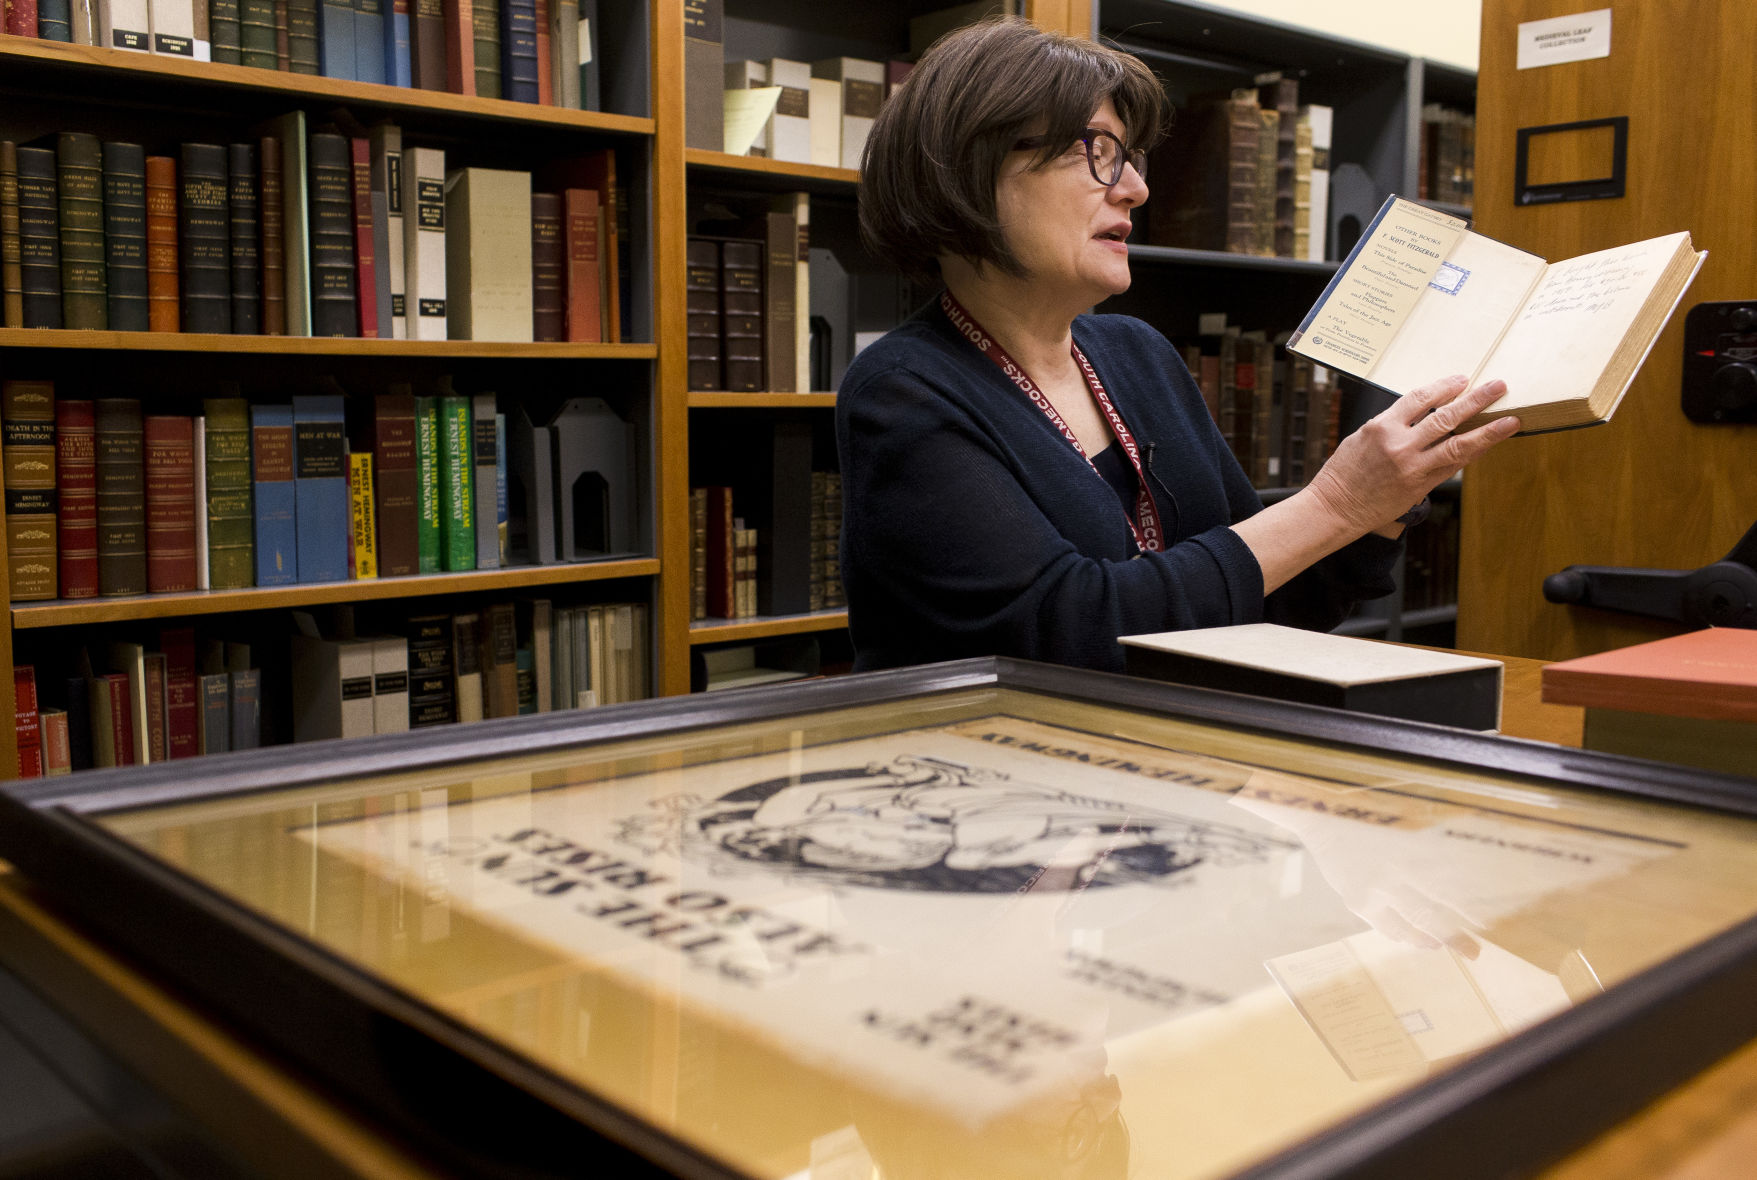 USC's F. Scott Fitzgerald collection among largest of its kind in